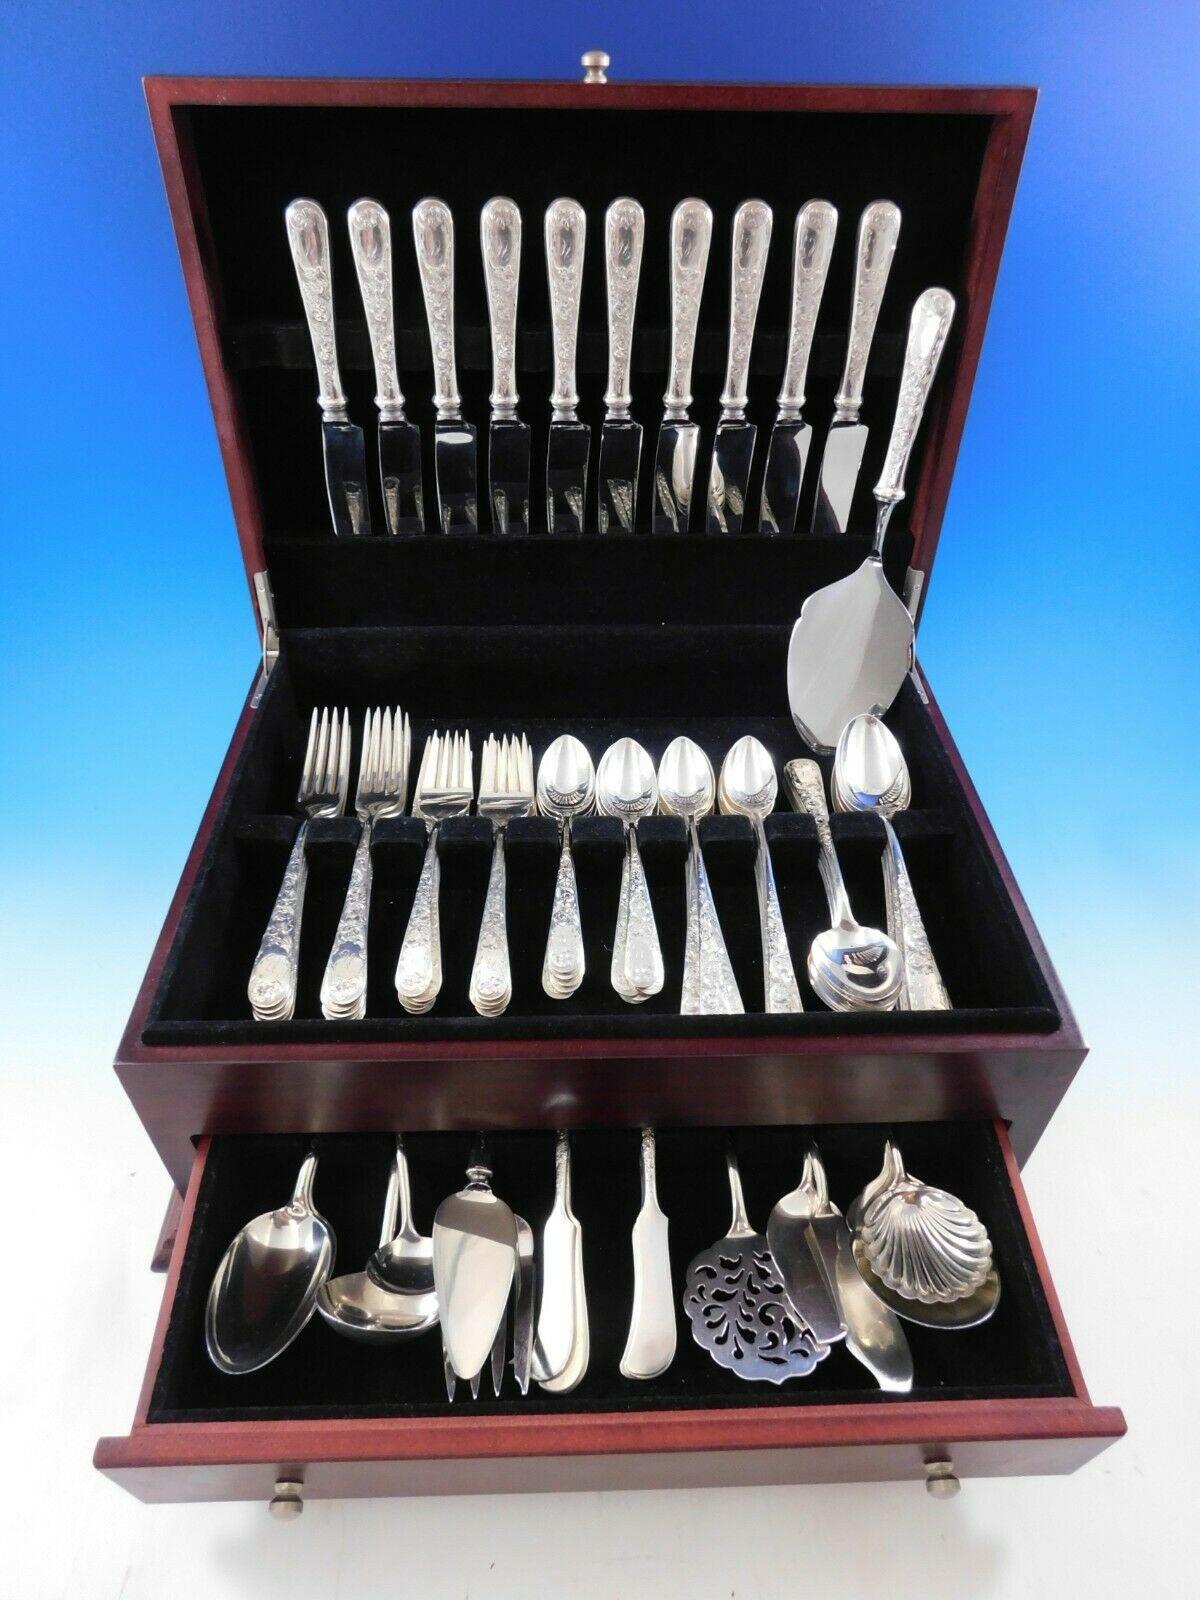 Monumental old Maryland engraved by Kirk sterling silver flatware set, 82 pieces. This set includes:

10 regular knives, 9